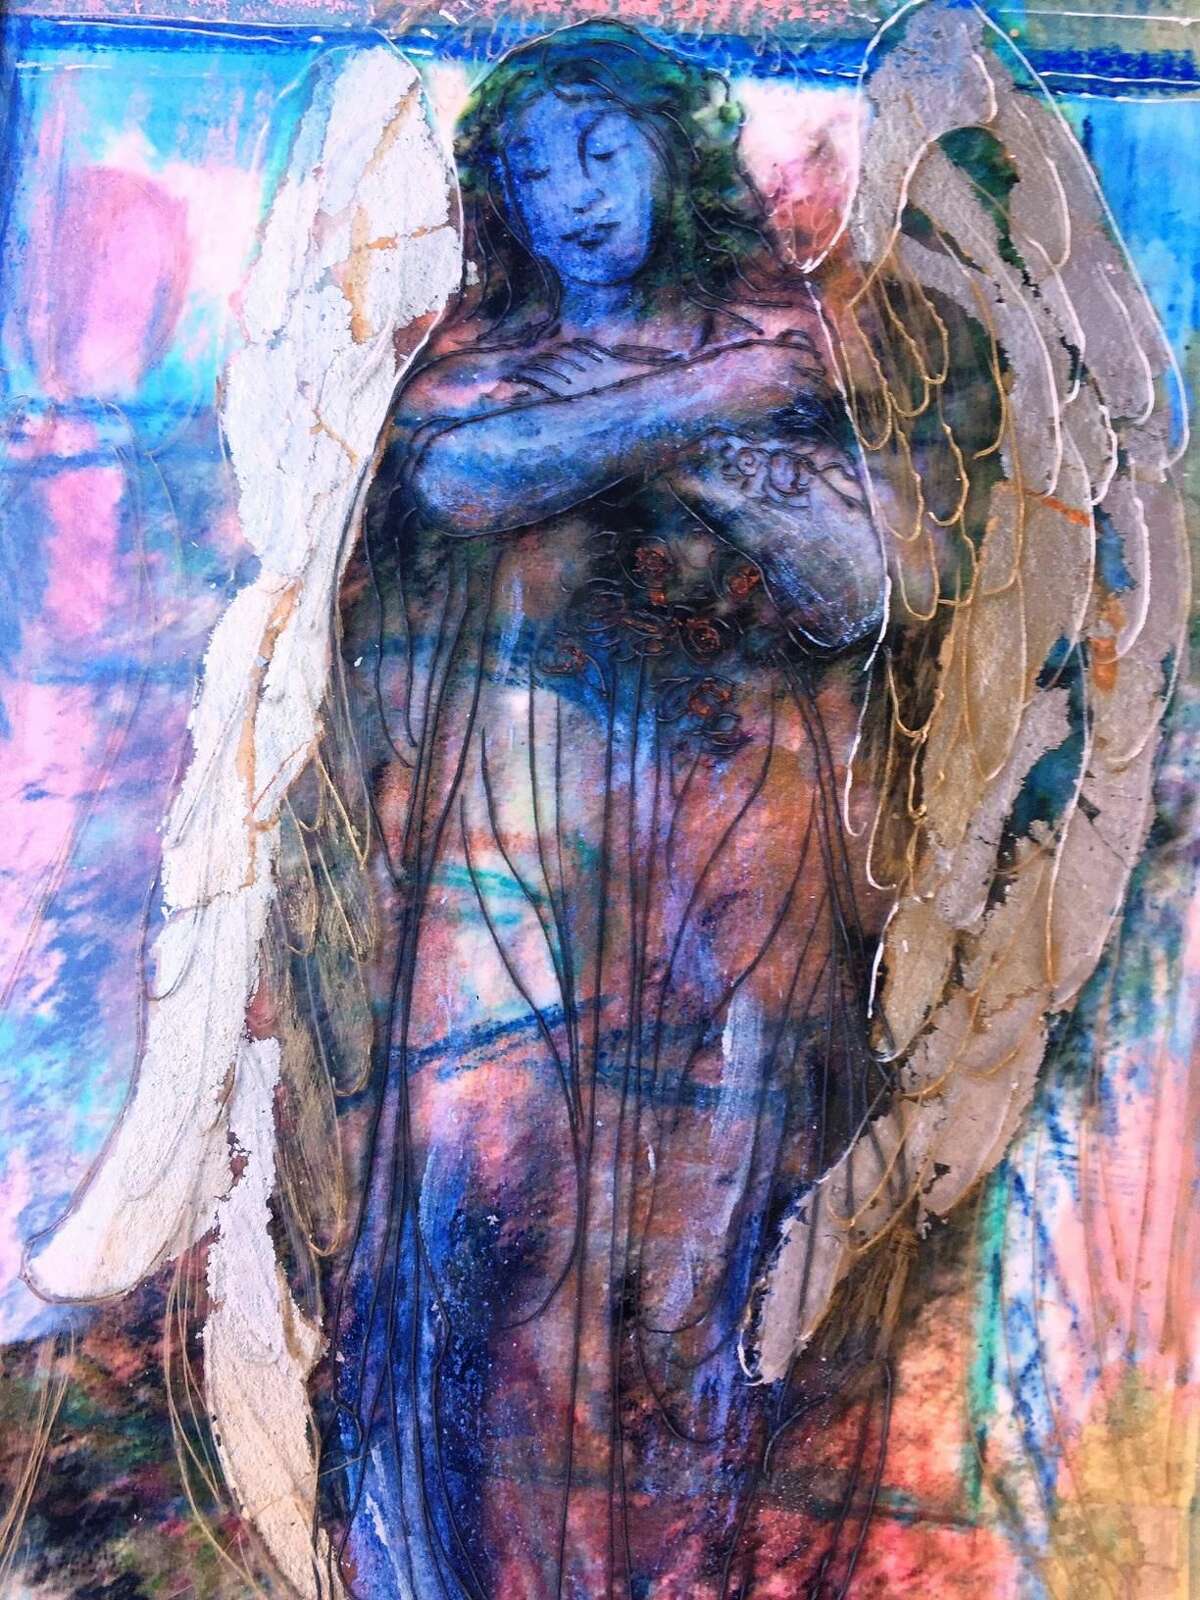 A mixed media angel by Lori Barker, CHH Artist of the Month for November.